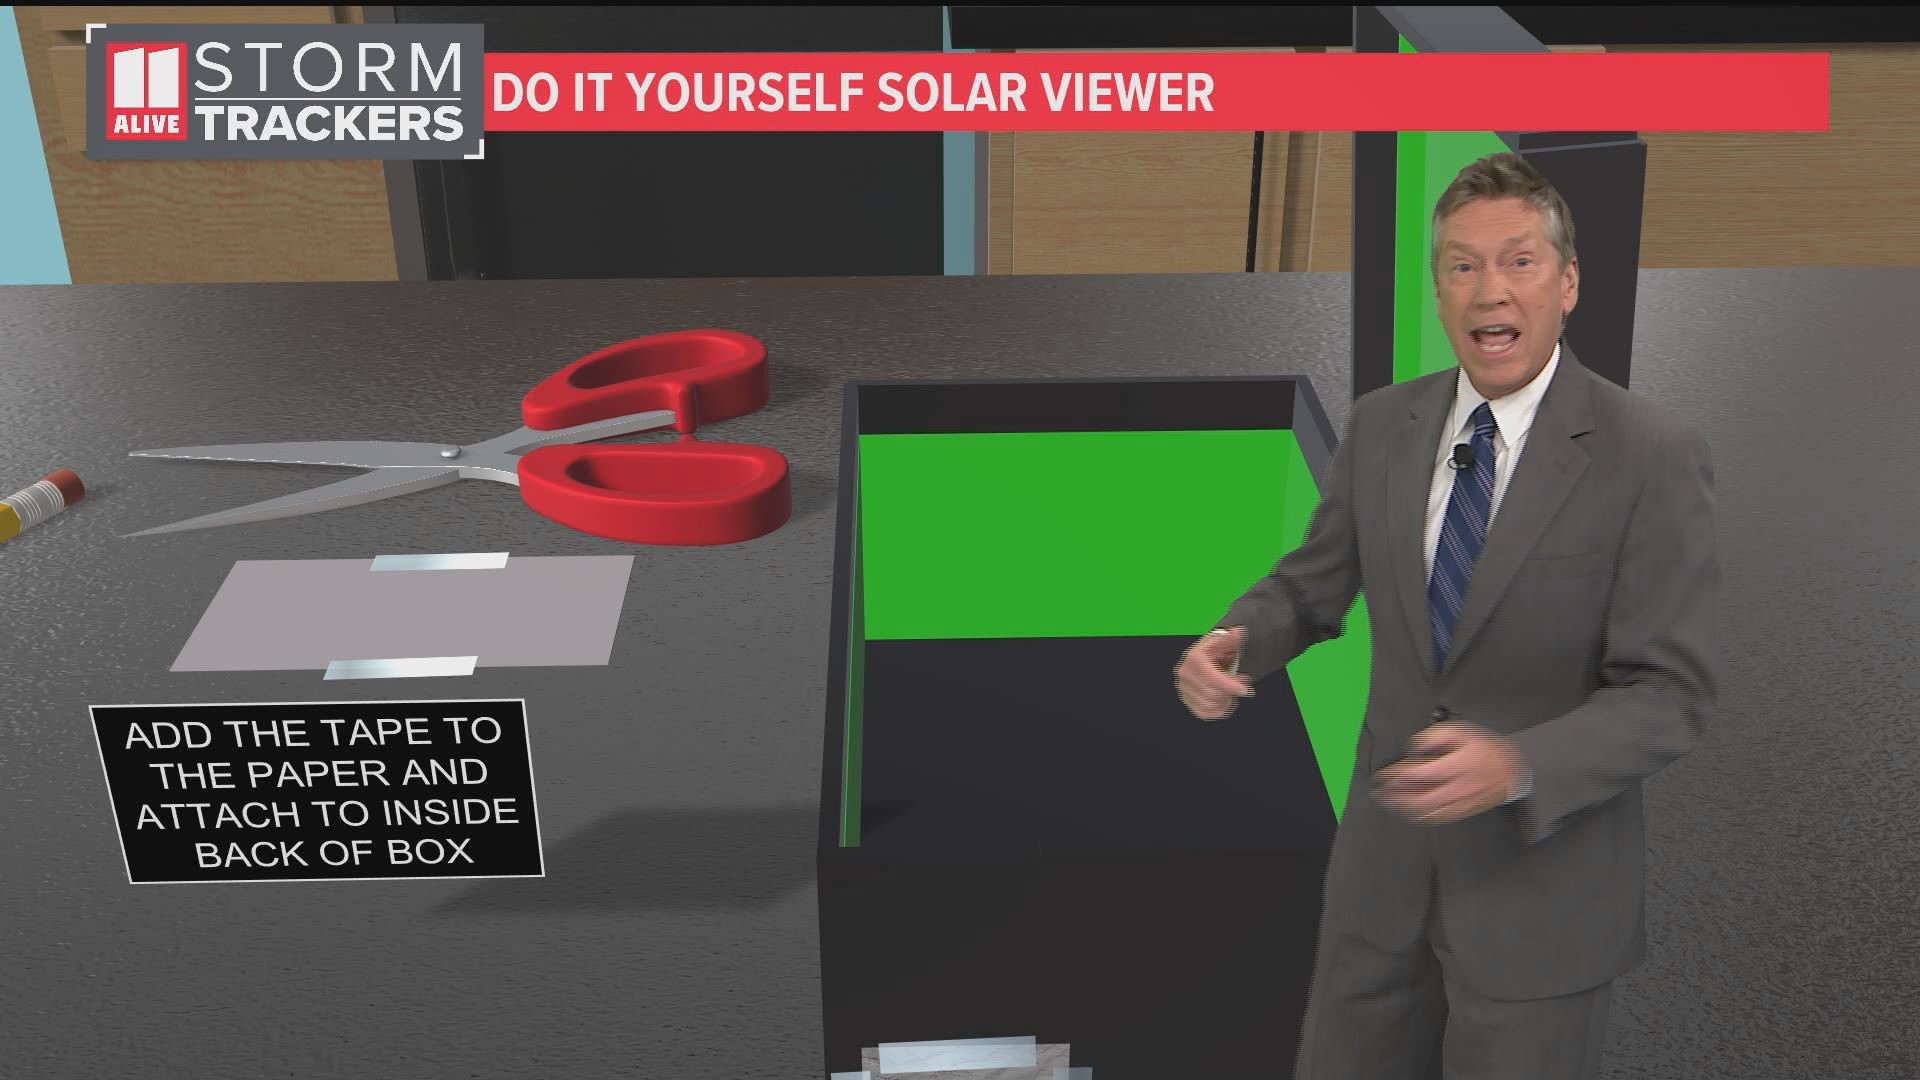 11Alive Chief Meteorologist Chris Holcomb is giving you some tips and tricks to make a safe solar viewer at home!